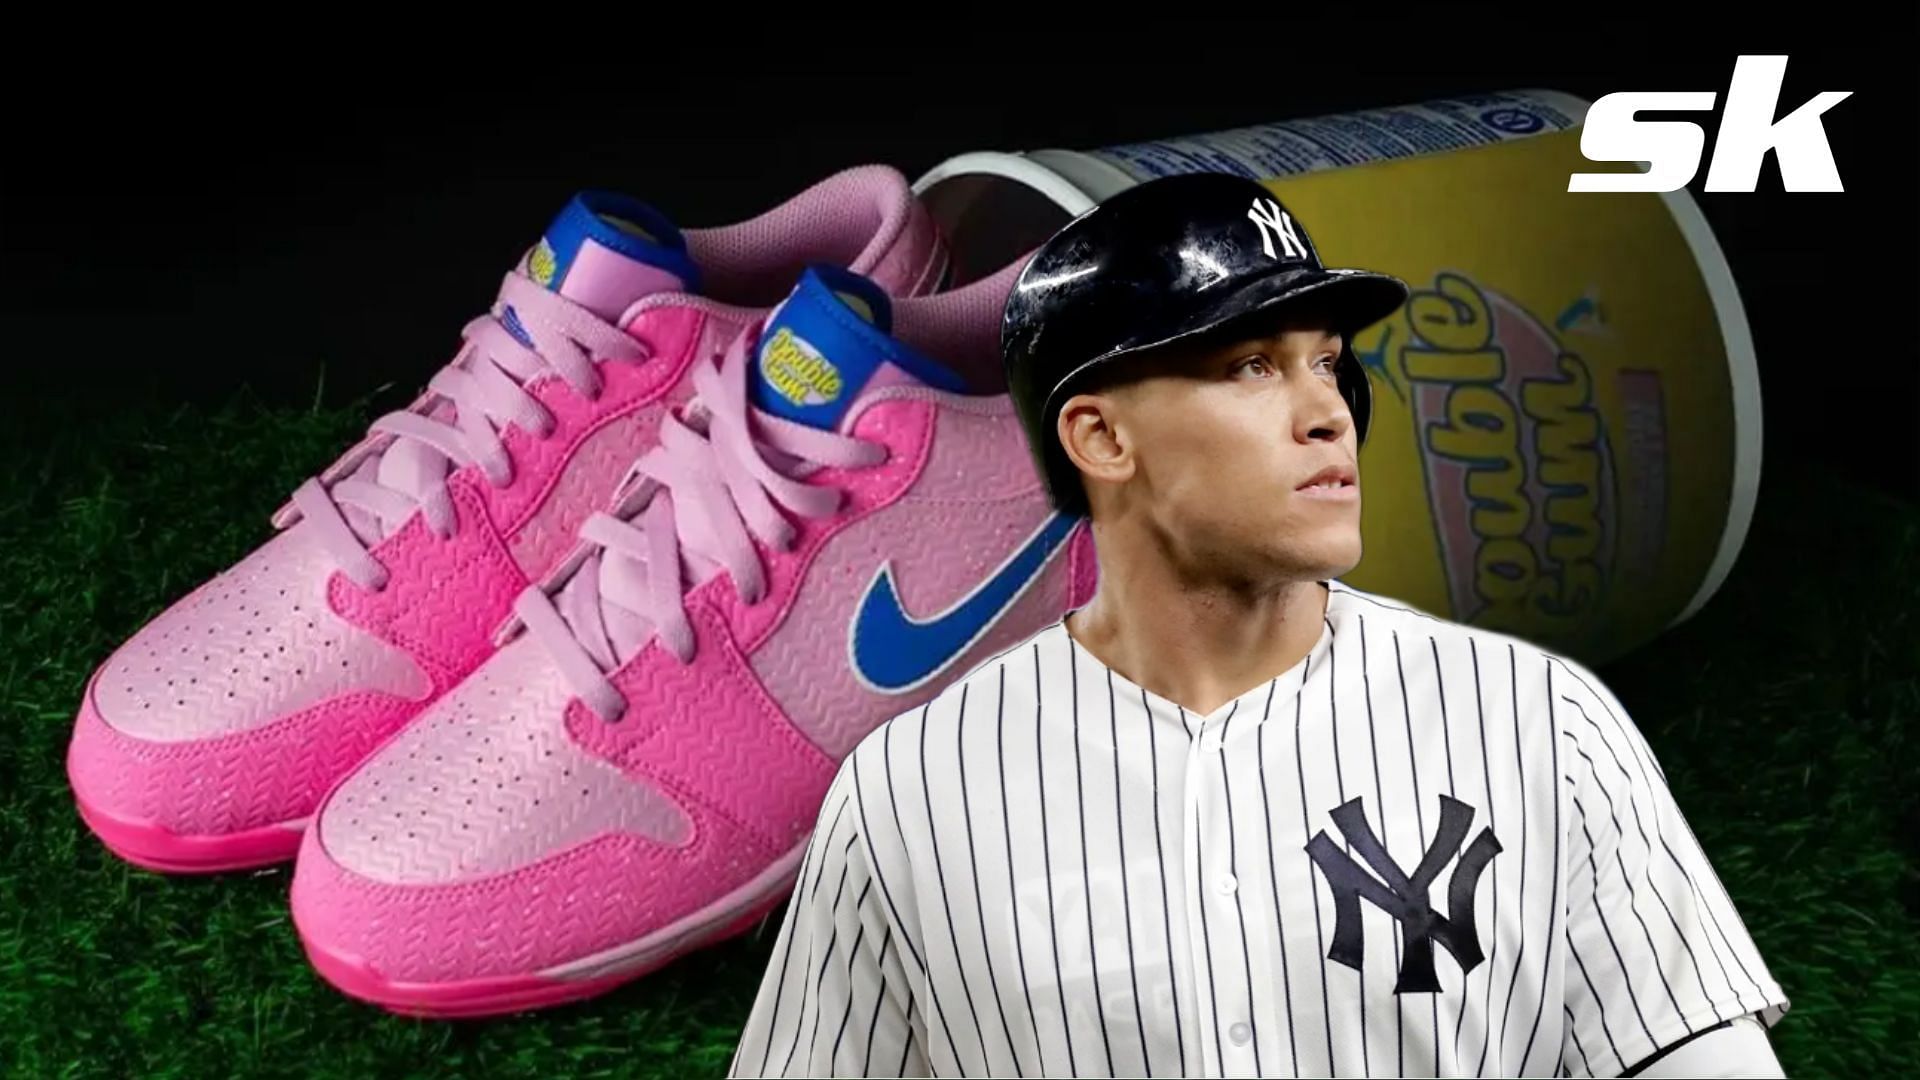 Aaron Judge's first Jordan PE cleat comes in the form of a Jordan 1  inspired by his in-game bubble gum game 🍬 The game: Pop 2 pieces of…